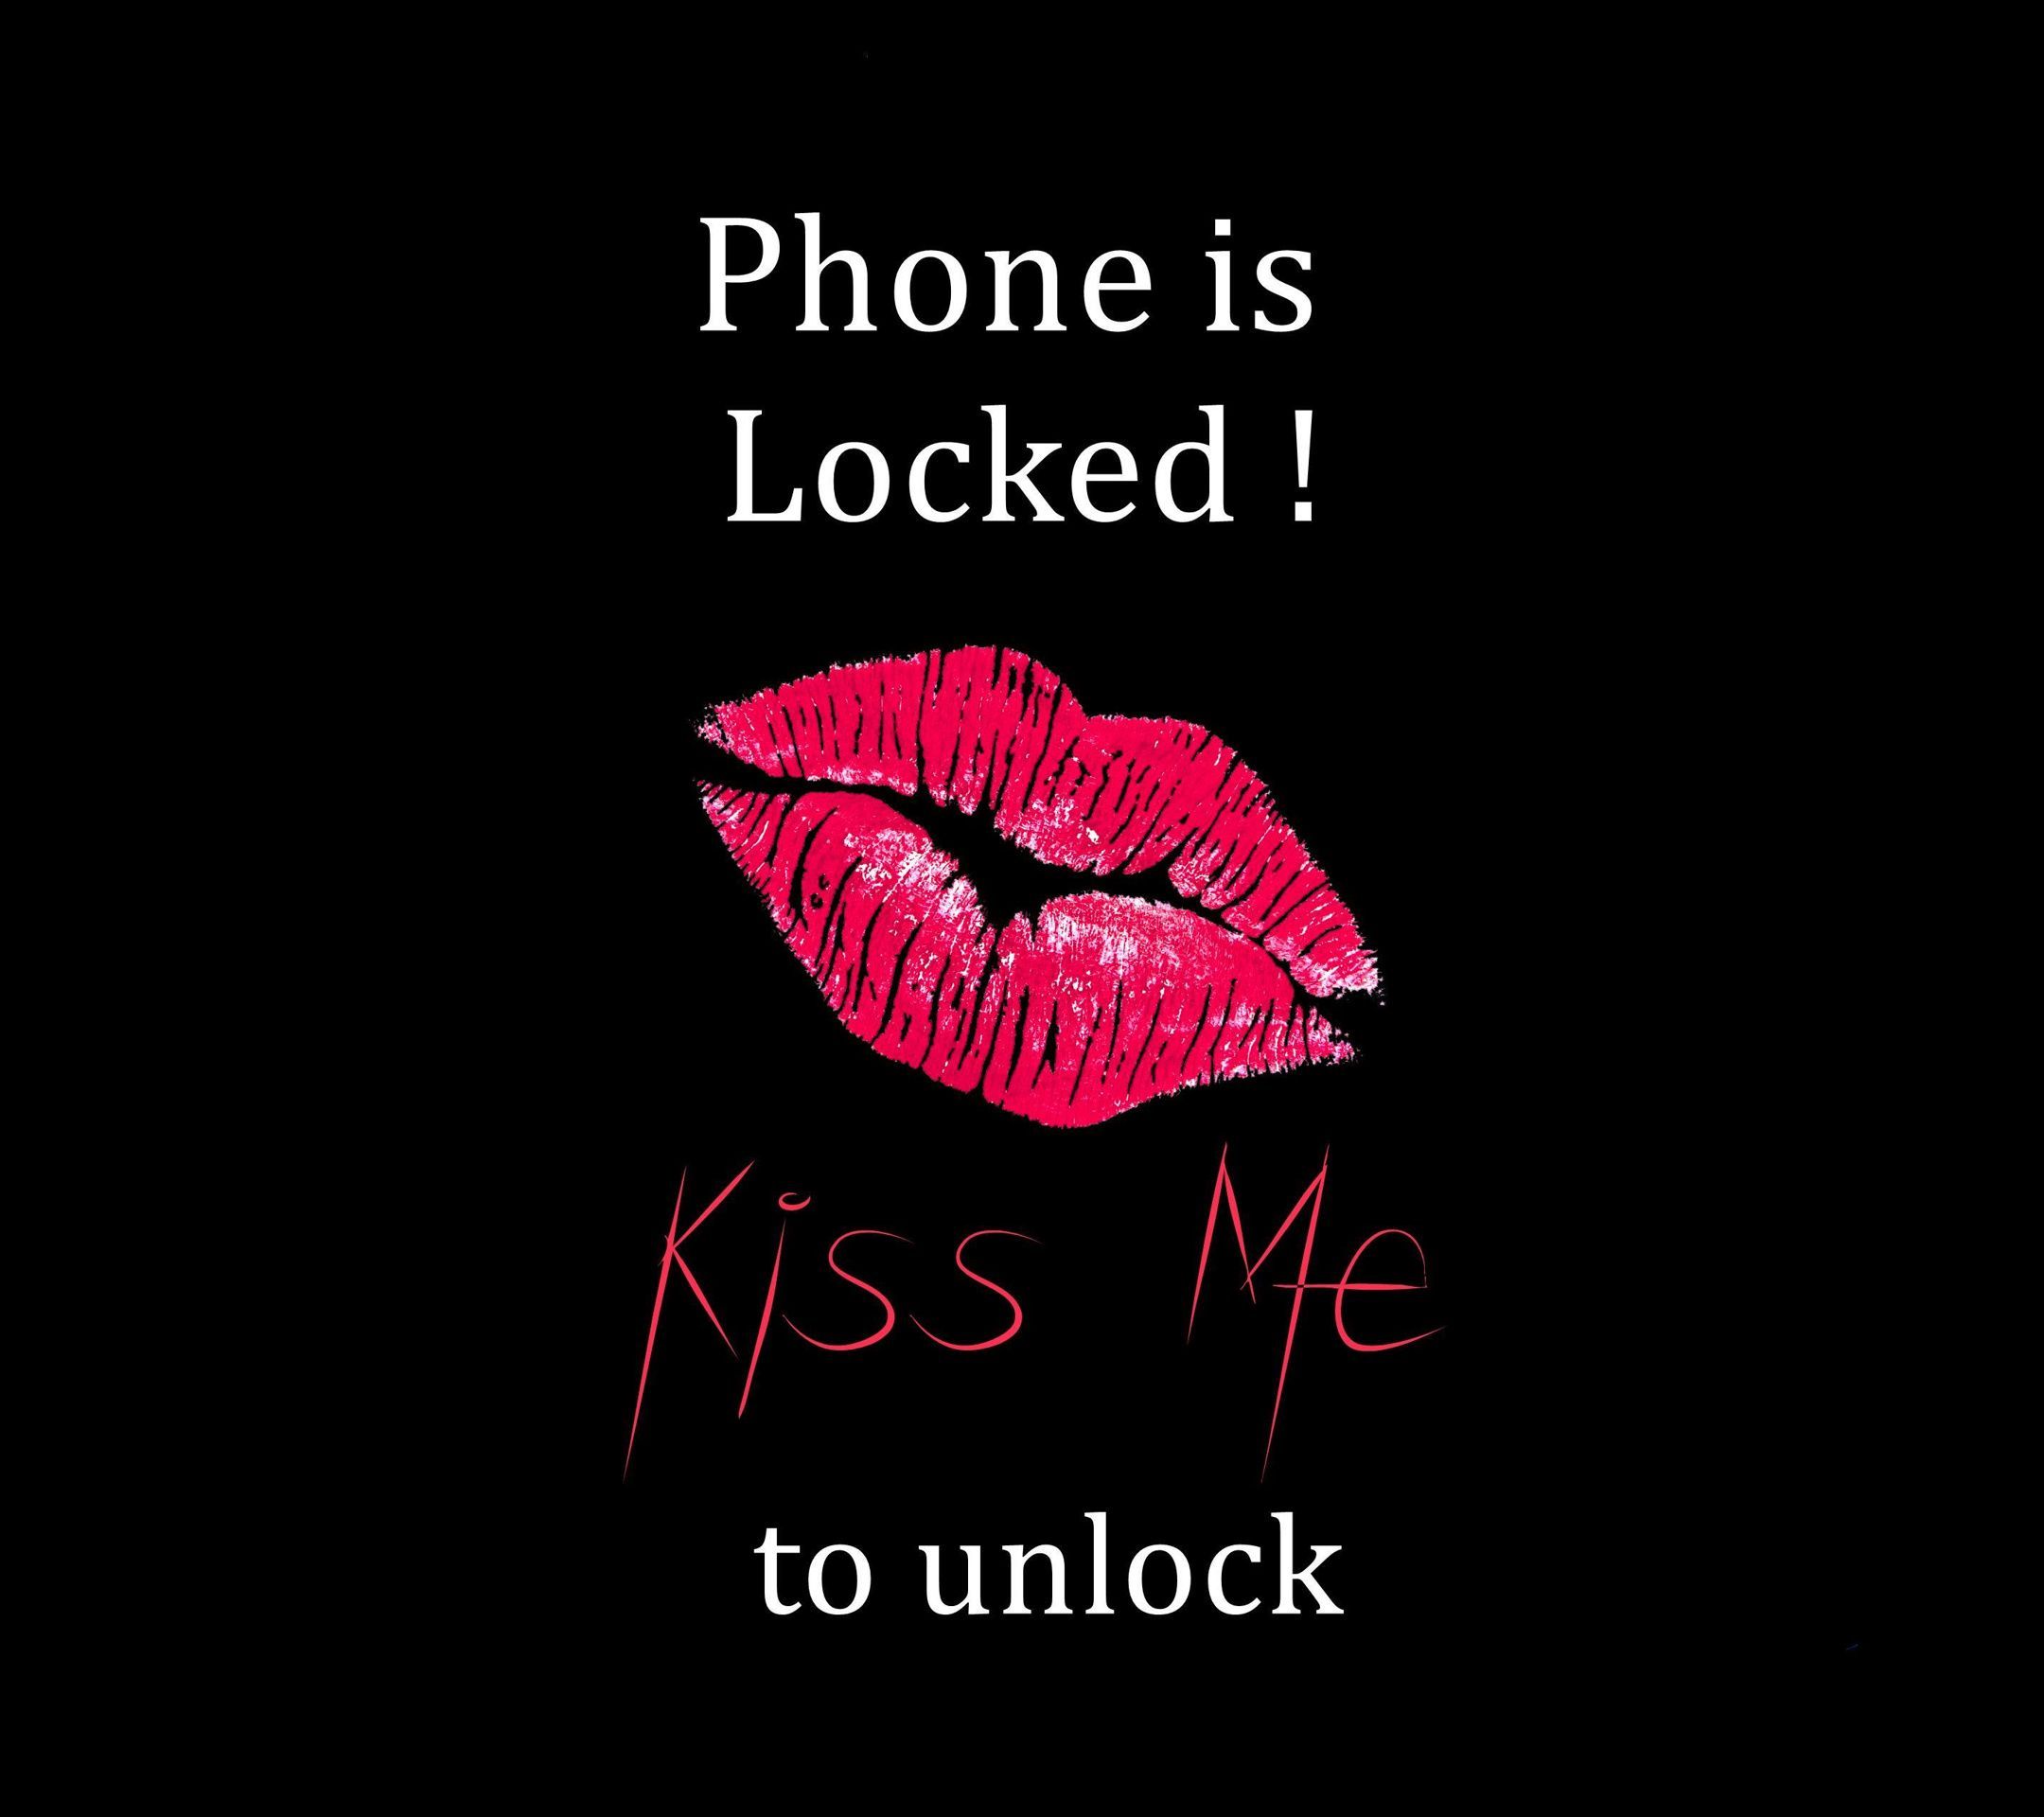 Phone Kiss Unlock 2160 x 1920 Wallpaper available for free